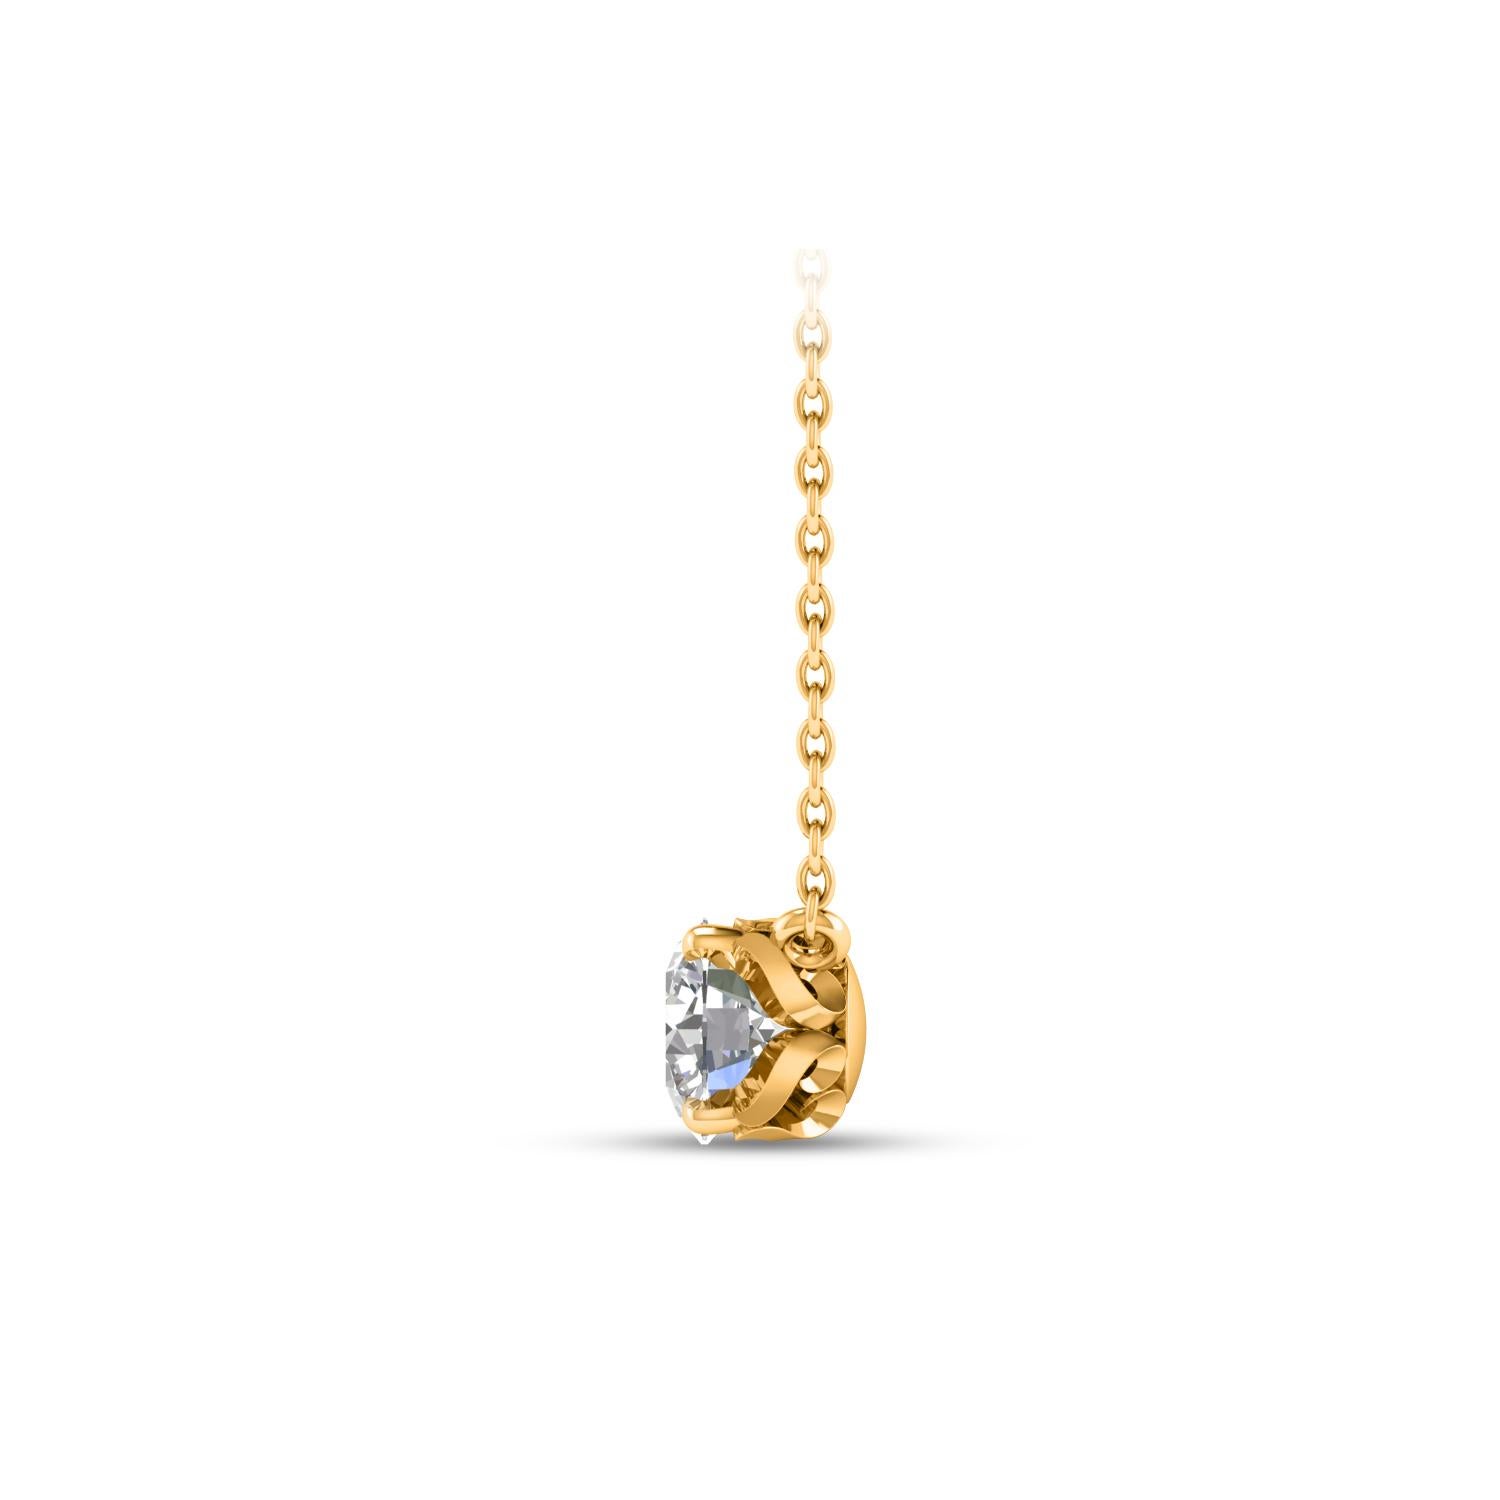 Round Cut Harakh GIA Certified 0.28 Carat Solitaire Diamond Pendant Necklace in 18 KT Gold For Sale